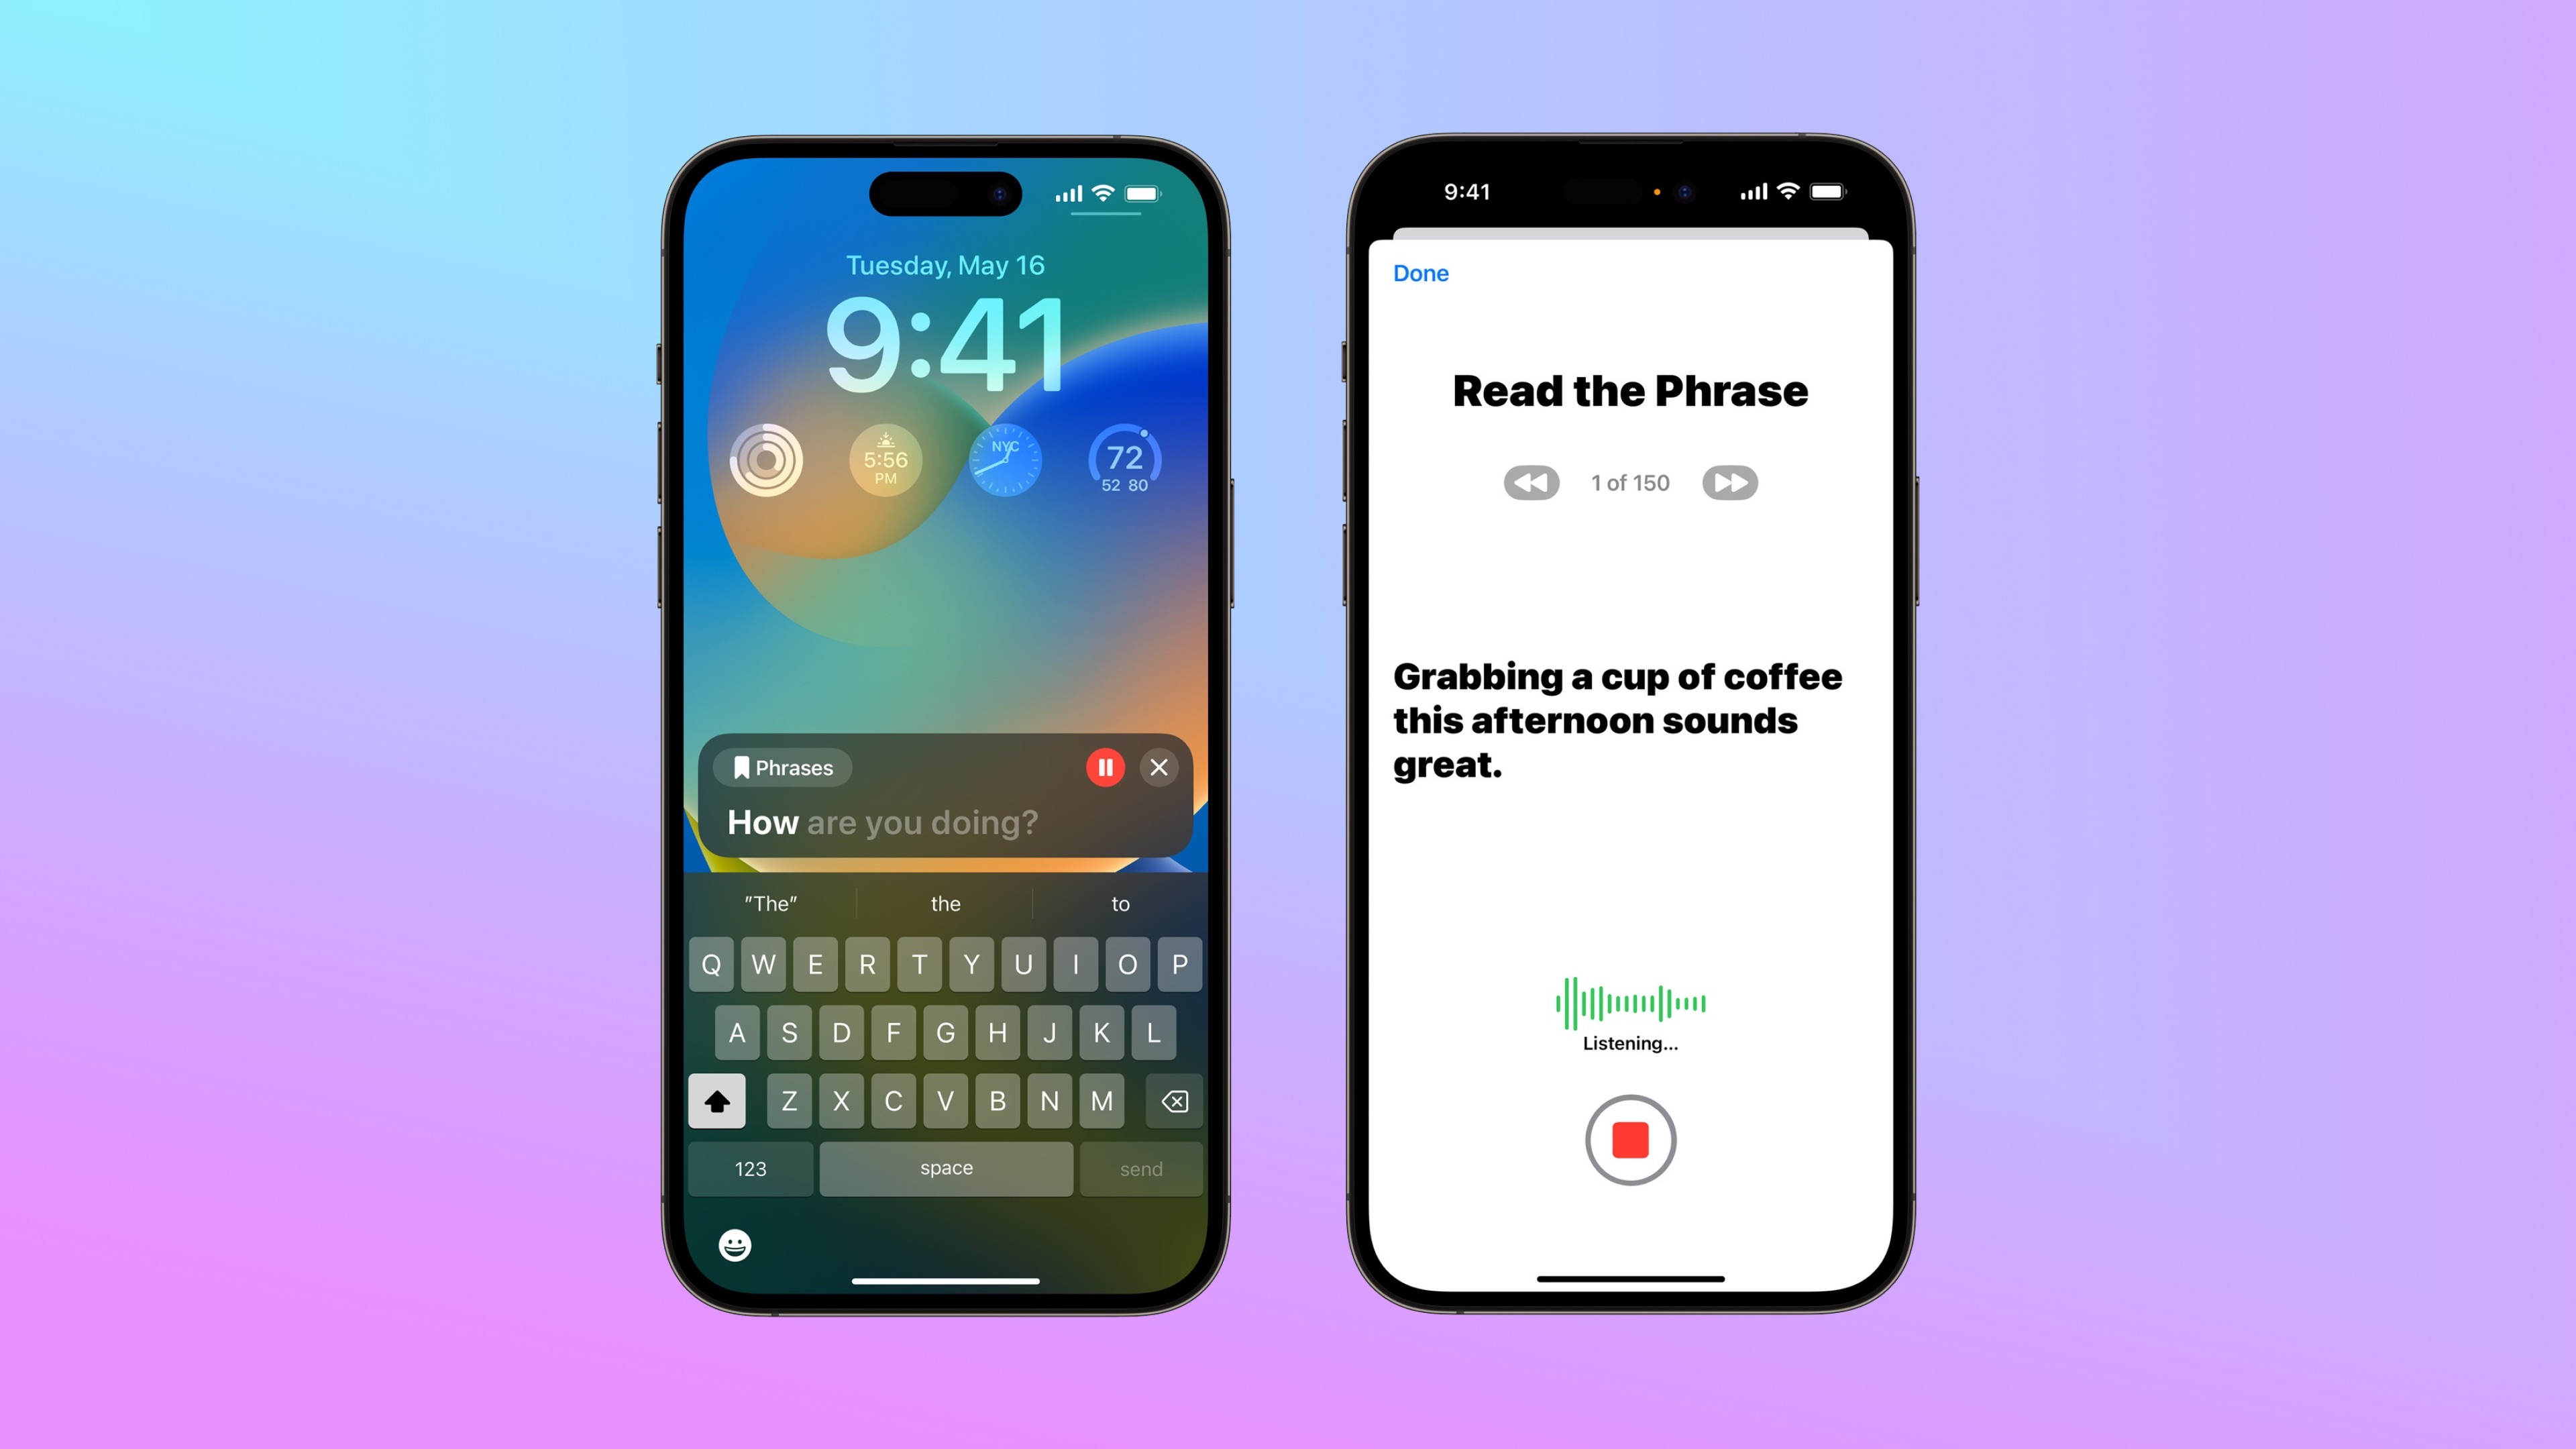 The image depicts two iPhones showing the process of setting up the Live Speech & Personal Voice functionality, with around one hundred and fifty phrases to repeat.